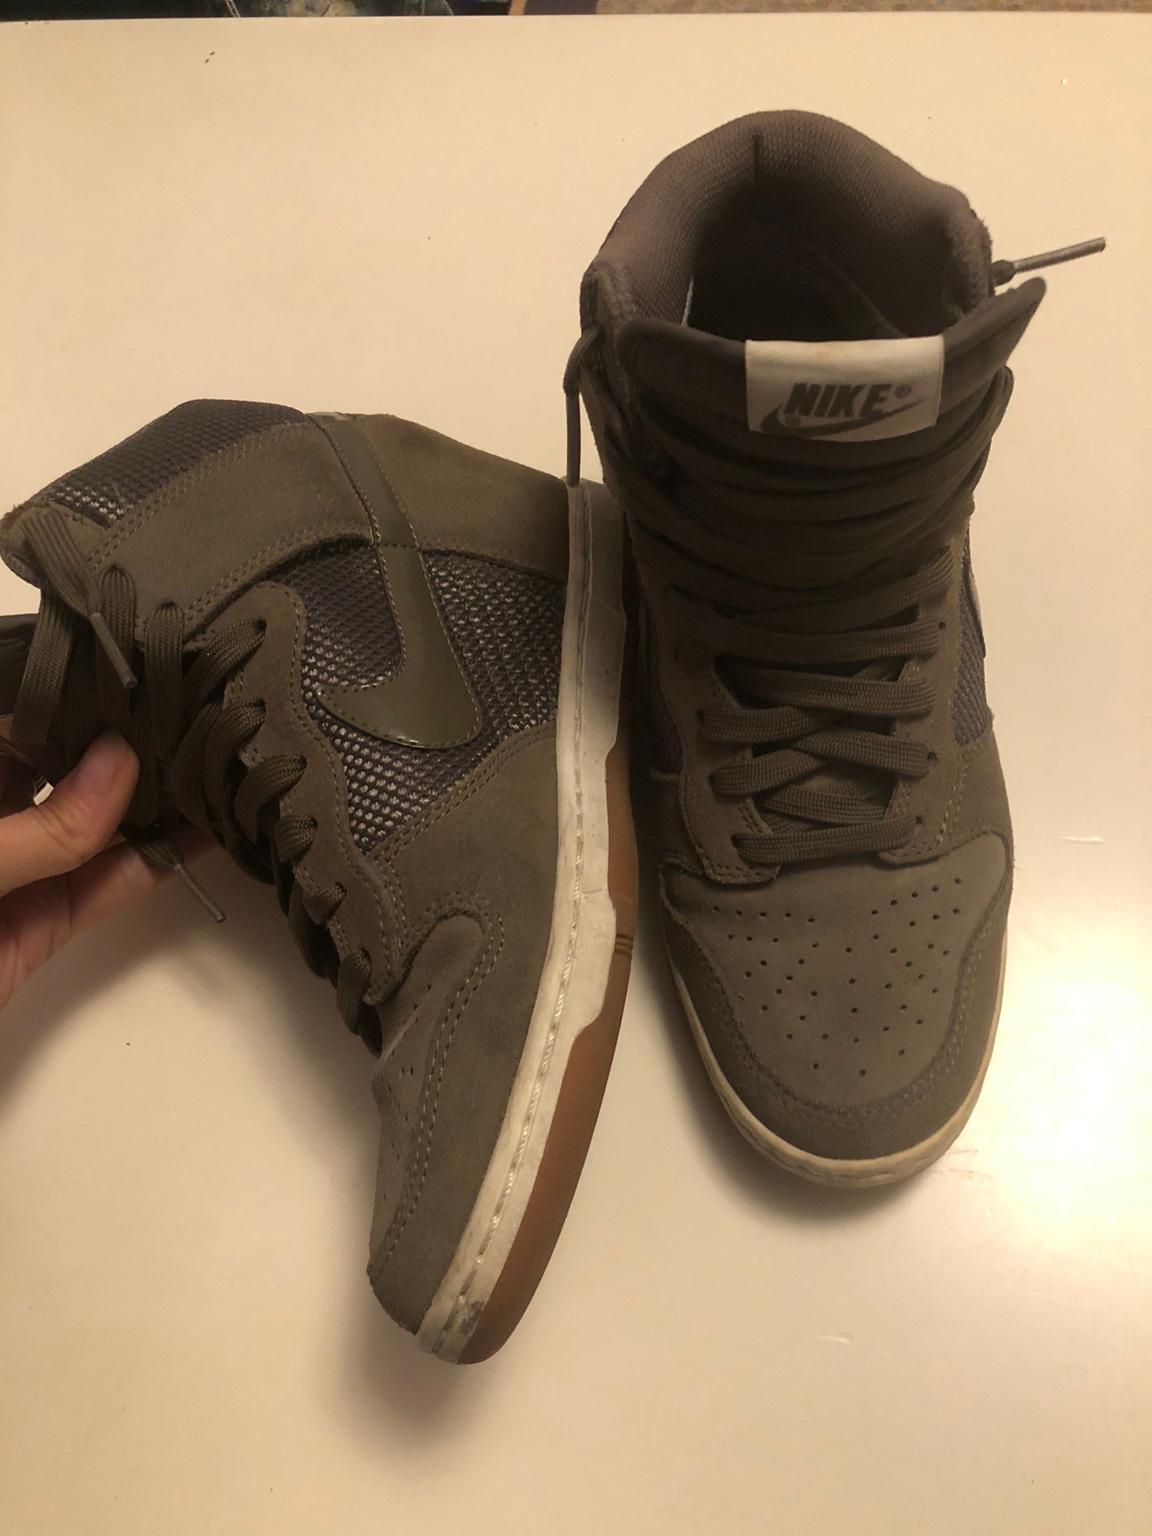 Nike Air rialzate in 00139 Roma for €30.00 for sale | Shpock